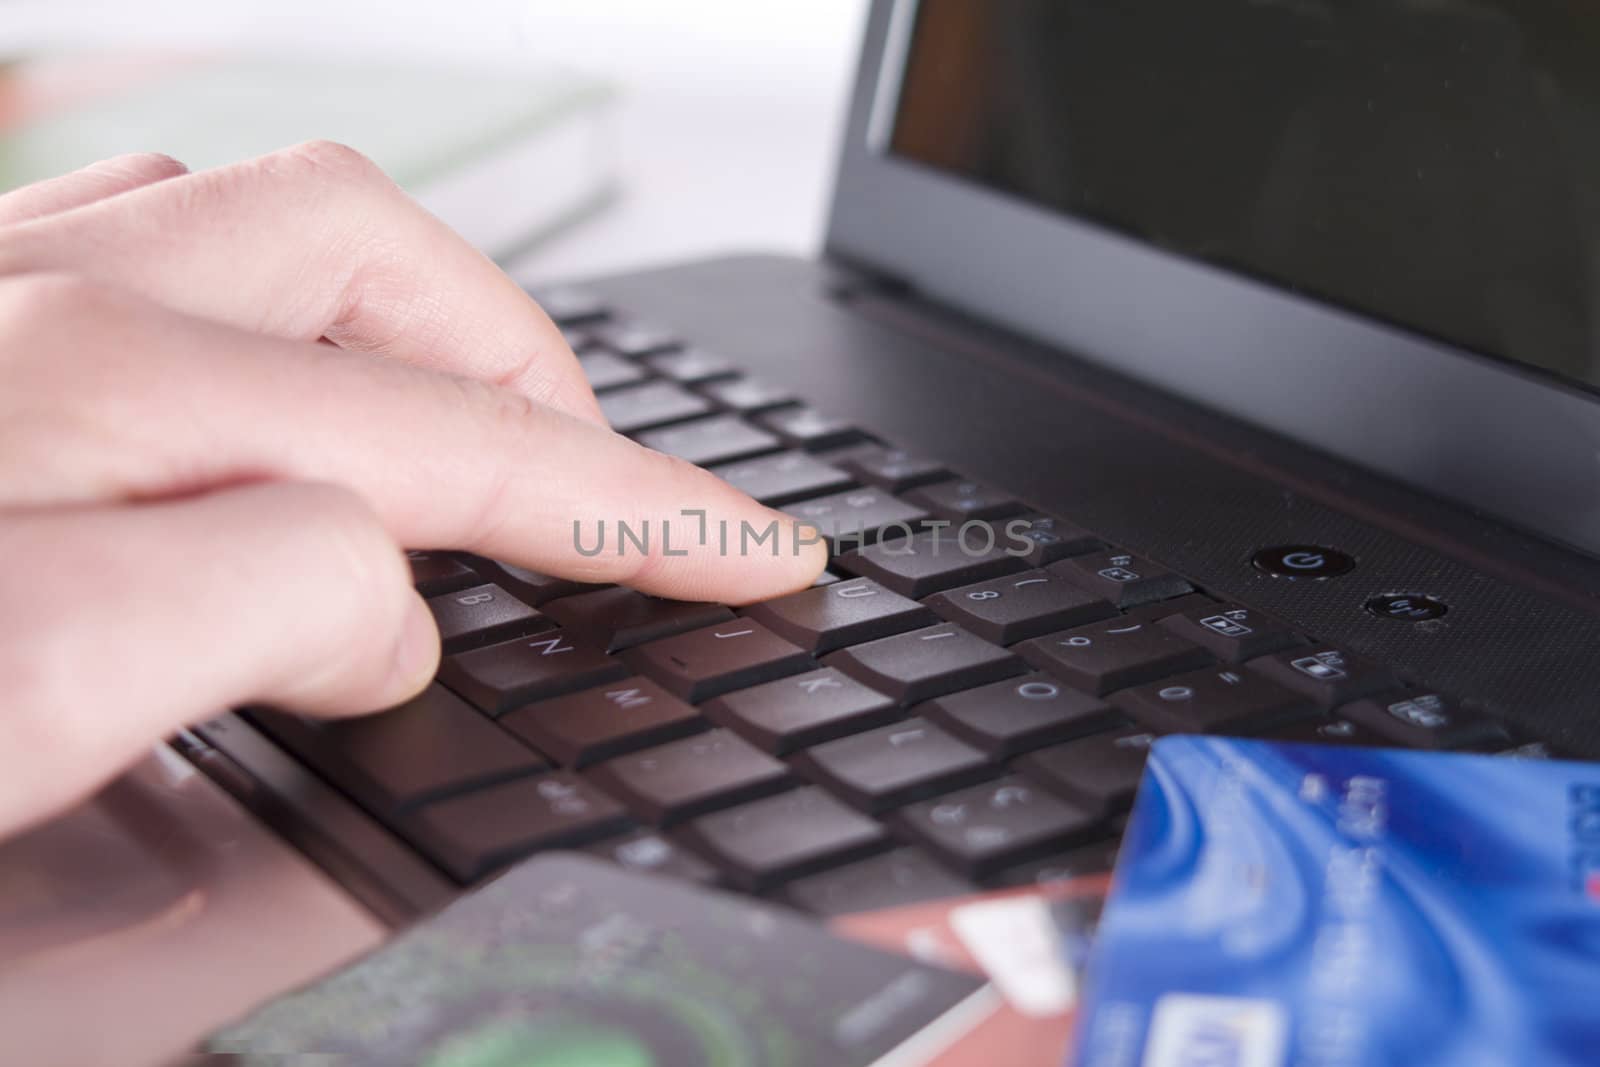 The hand works with the keyboard, in the foreground credit cards. Small depth of sharpness.